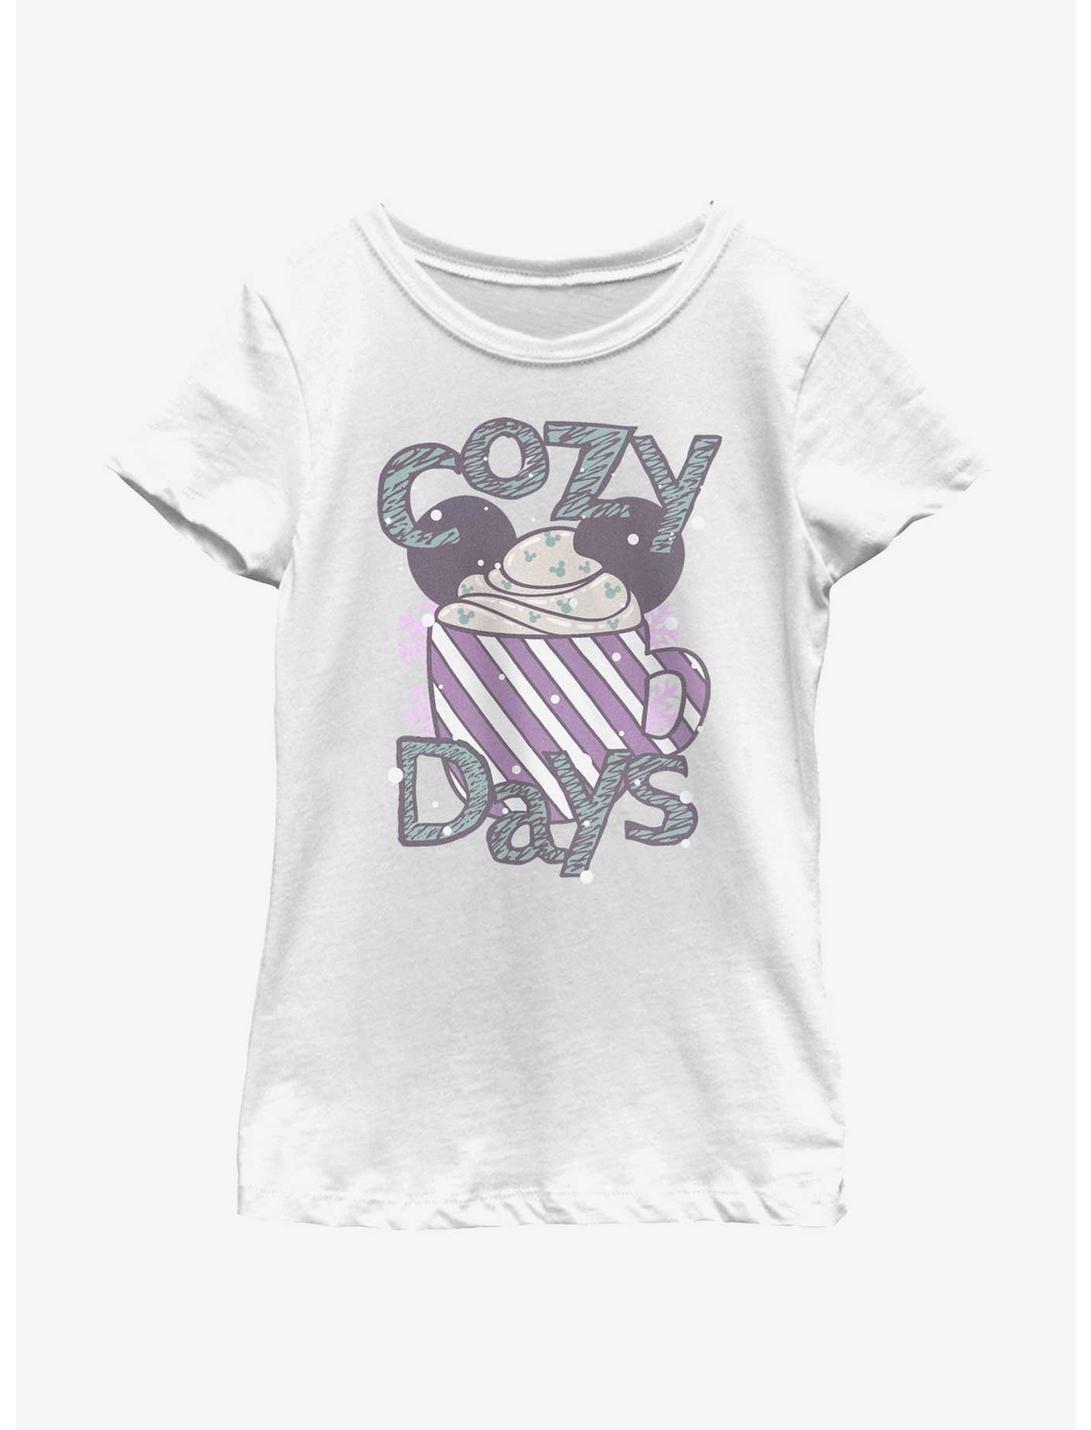 Disney Mickey Mouse Cozy Days Hot Cocoa Youth Girls T-Shirt, WHITE, hi-res